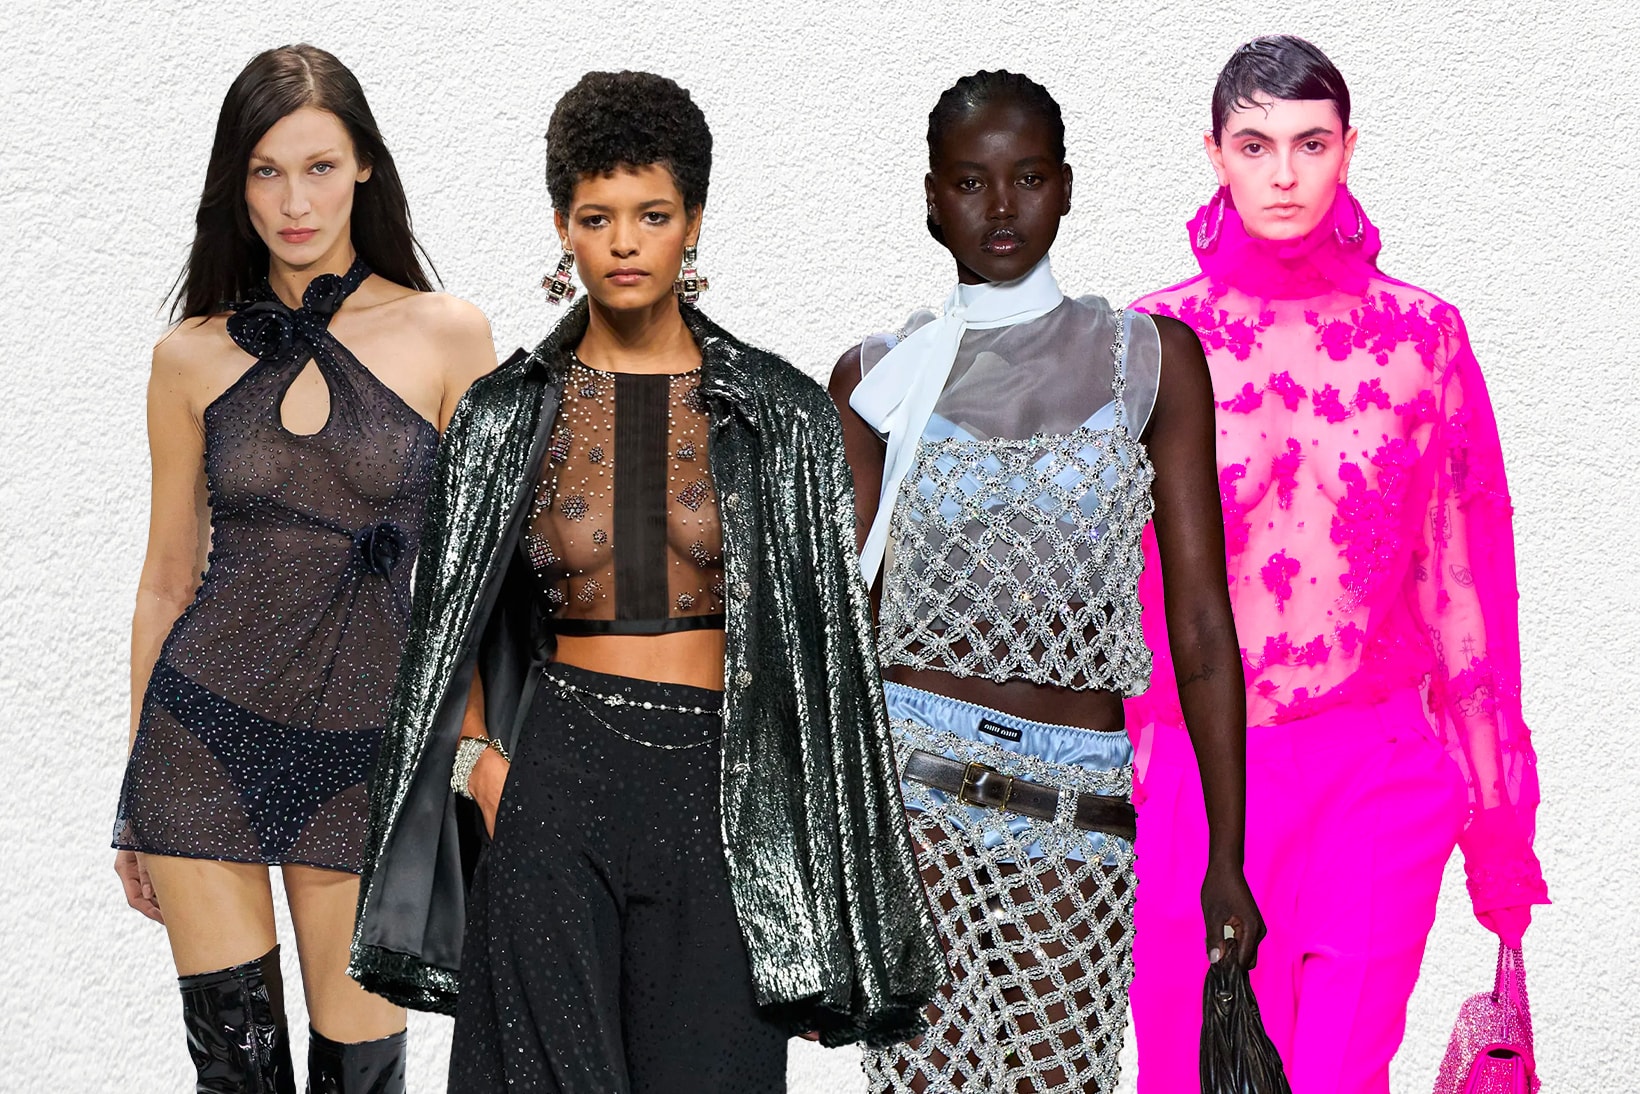 FW22 Fashion Trend Report: Women's Fashion Trends For Fall/Winter